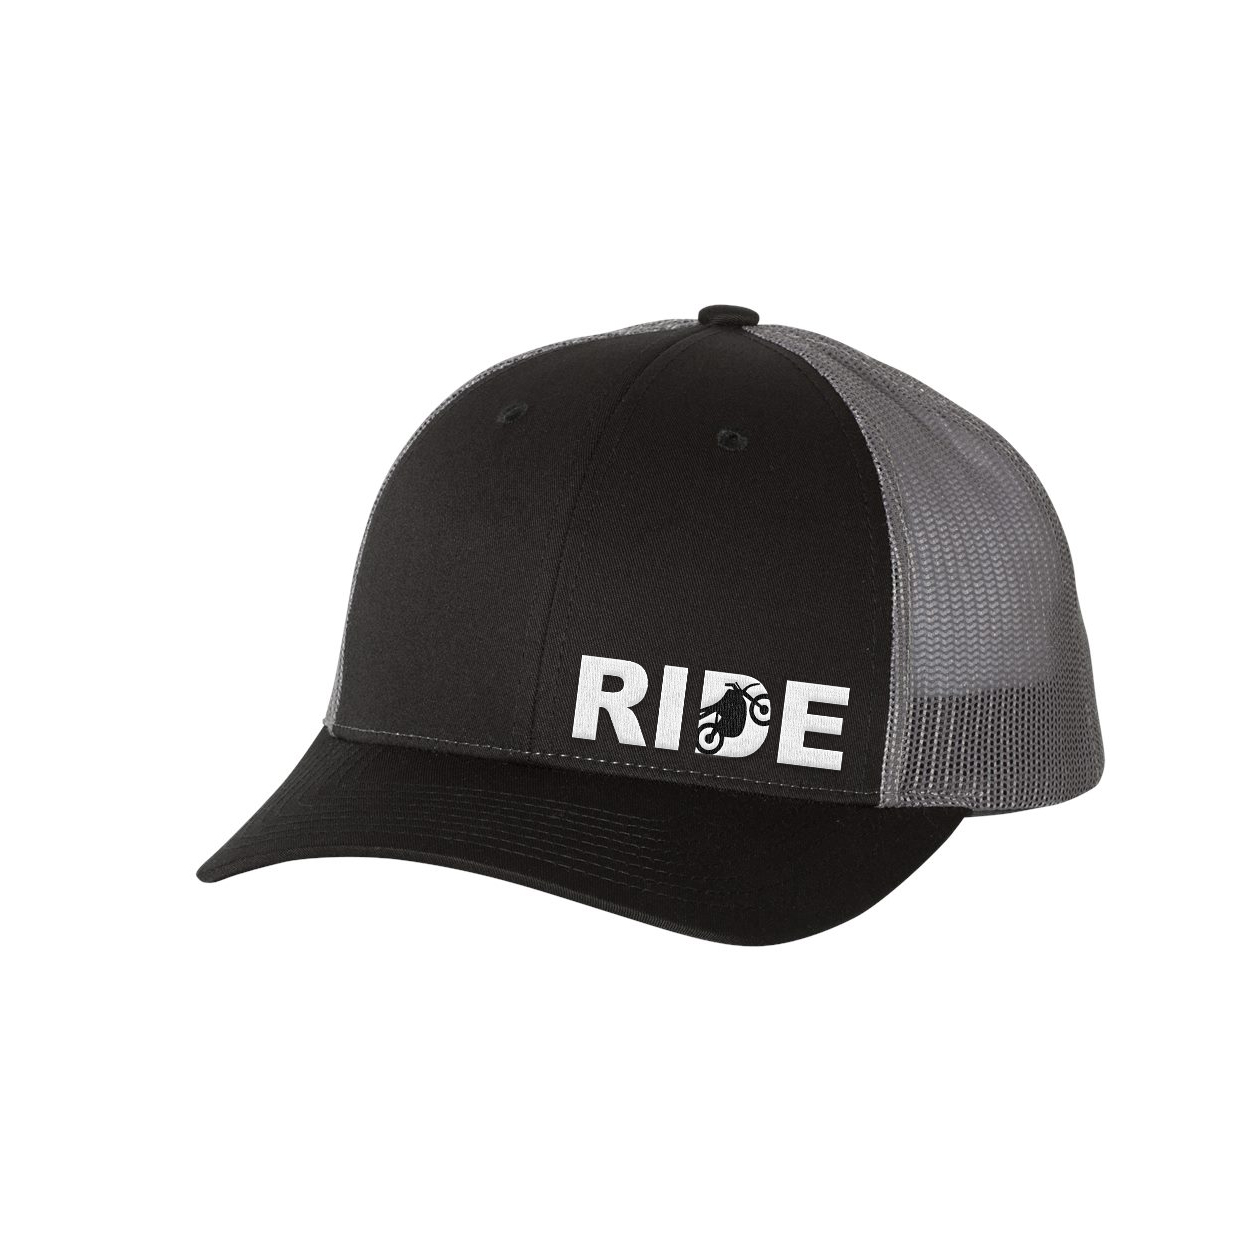 Ride Moto Logo Night Out Embroidered Snapback Trucker Hat Black/Gray